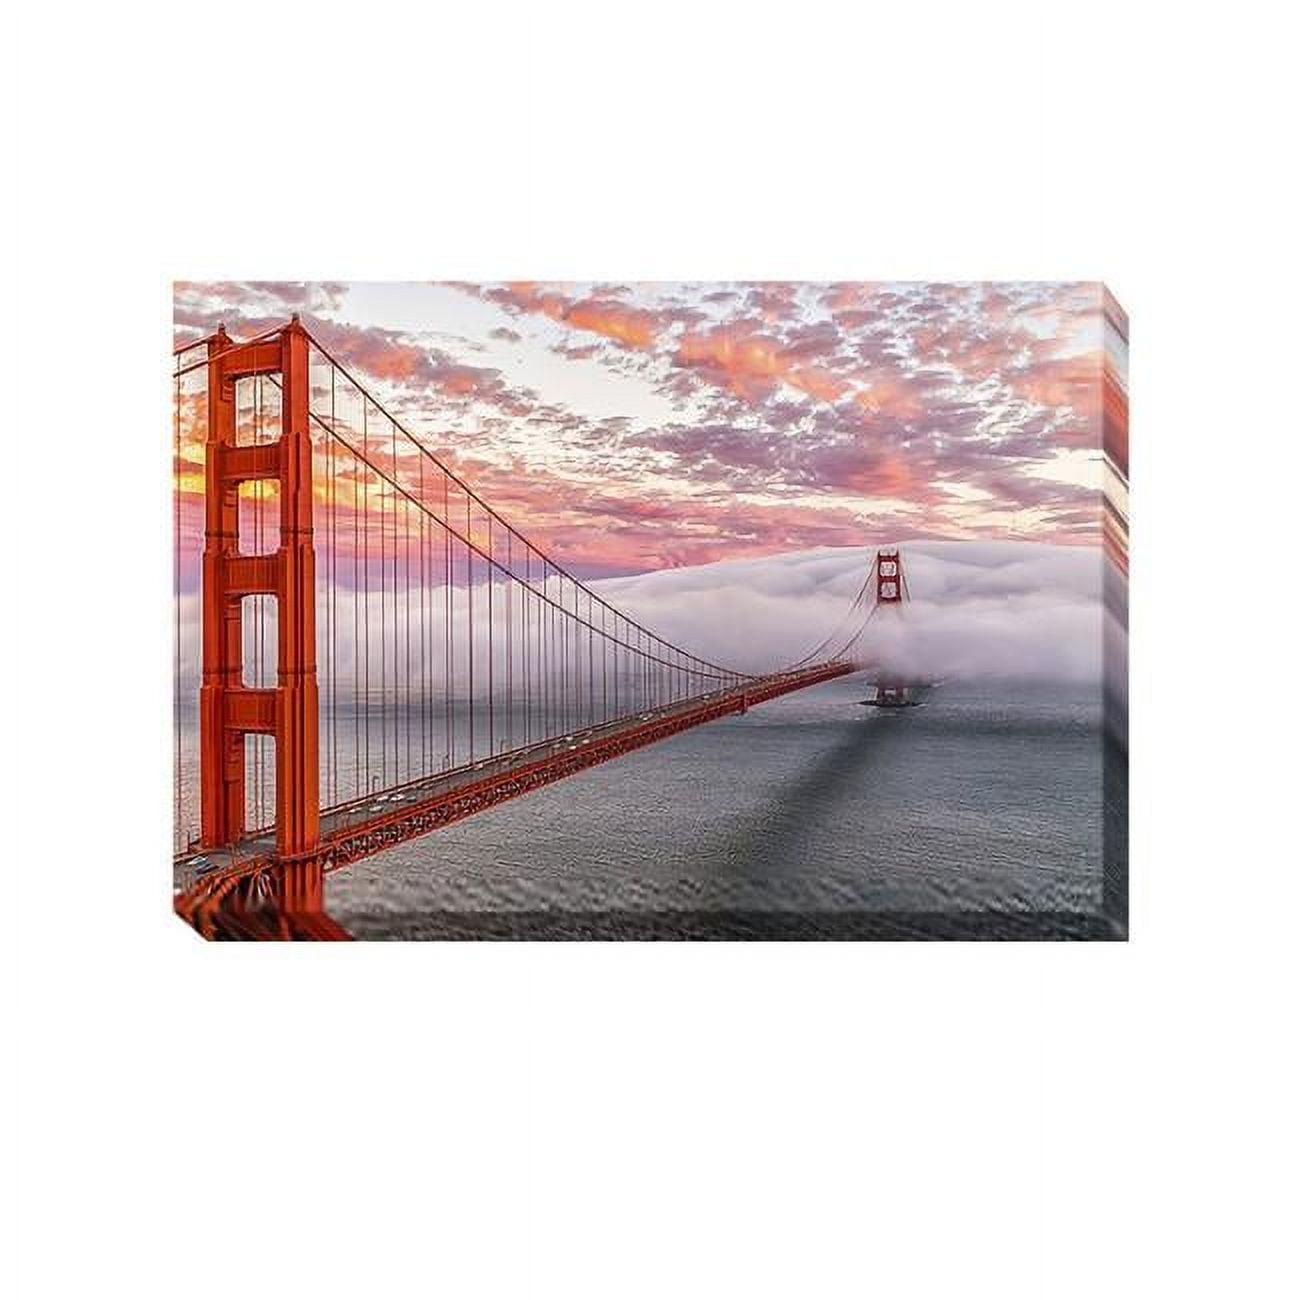 1218g277ig Evening Commute By Dave Gordon Custom Gallery-wrapped Canvas Giclee Art - 12 X 18 X 1.5 In.